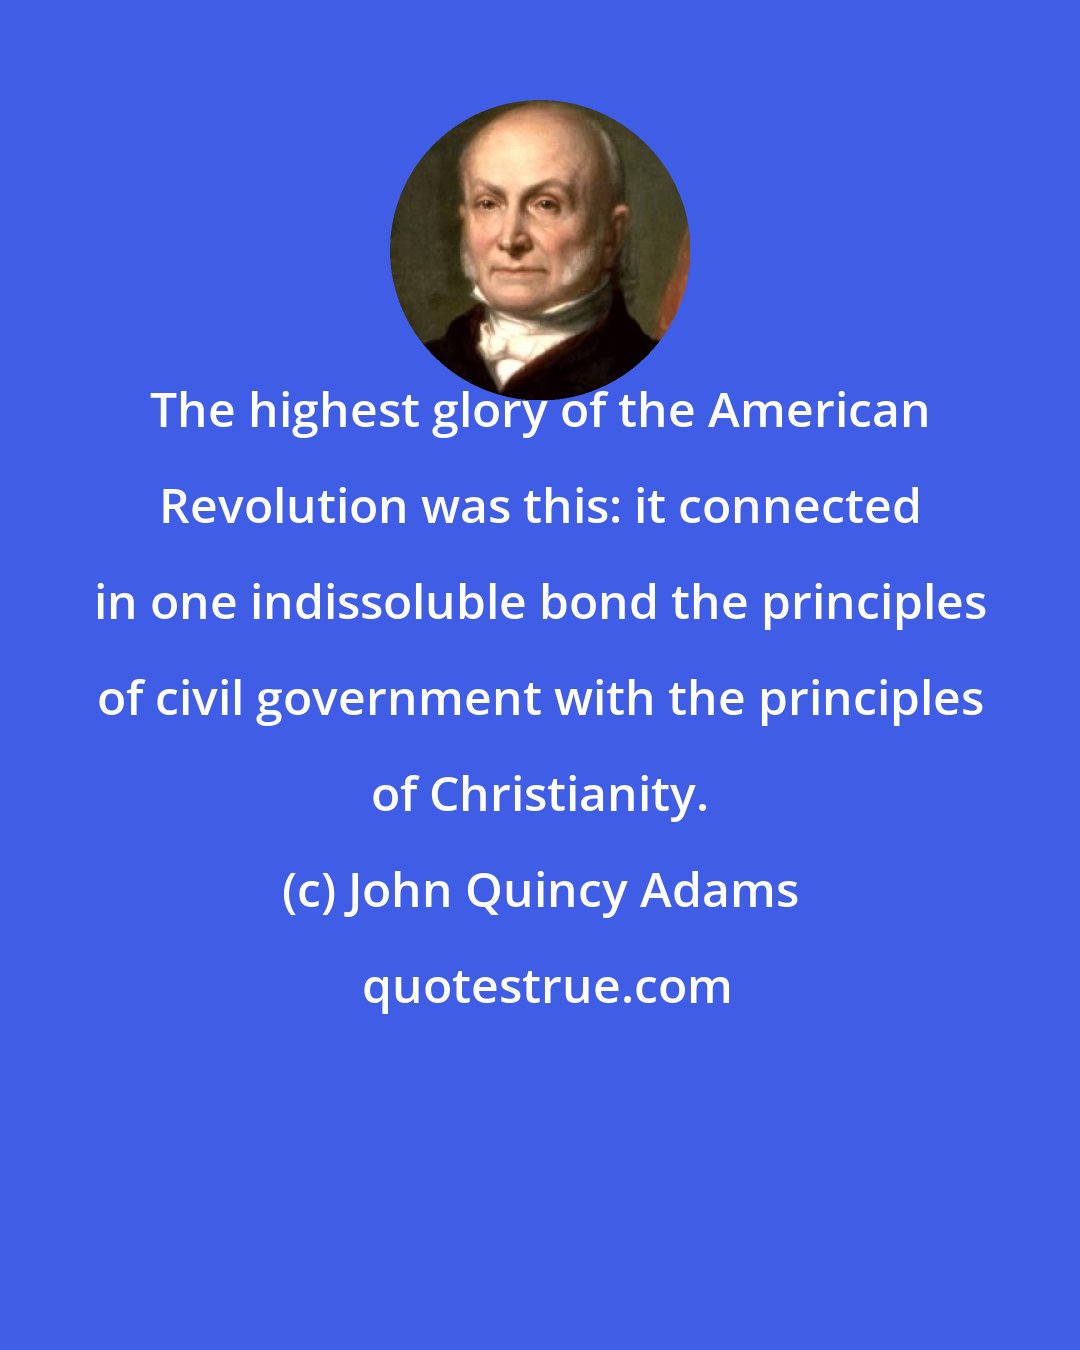 John Quincy Adams: The highest glory of the American Revolution was this: it connected in one indissoluble bond the principles of civil government with the principles of Christianity.